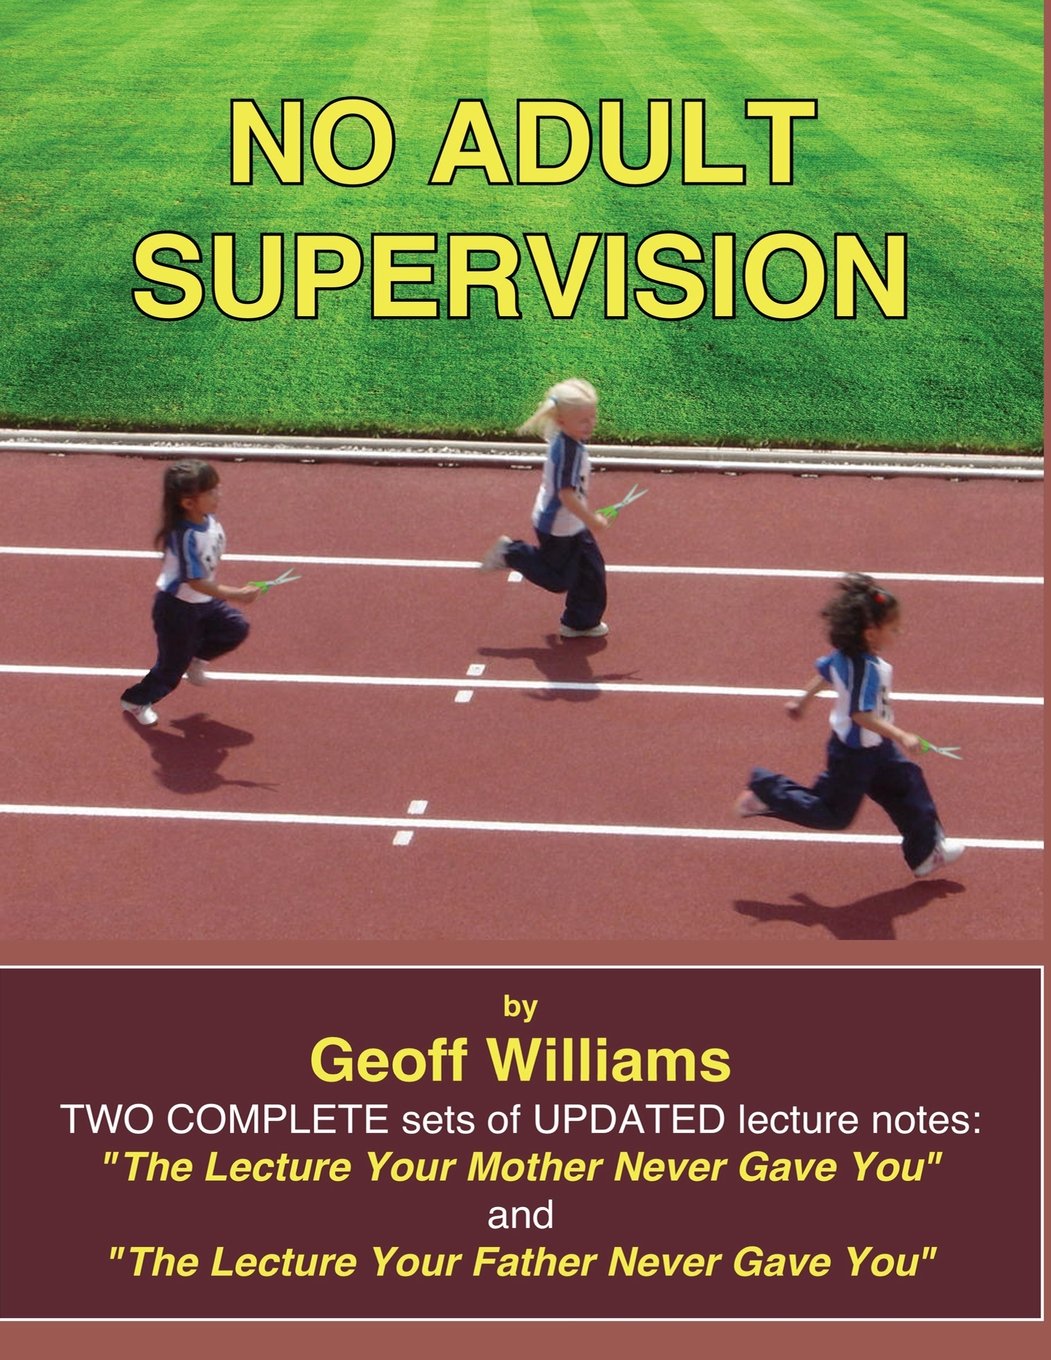 Geoff Williams - No Adult Supervision (Lecture Notes 1 & 2) - The lecture your mother never gave you (PDF+Video)